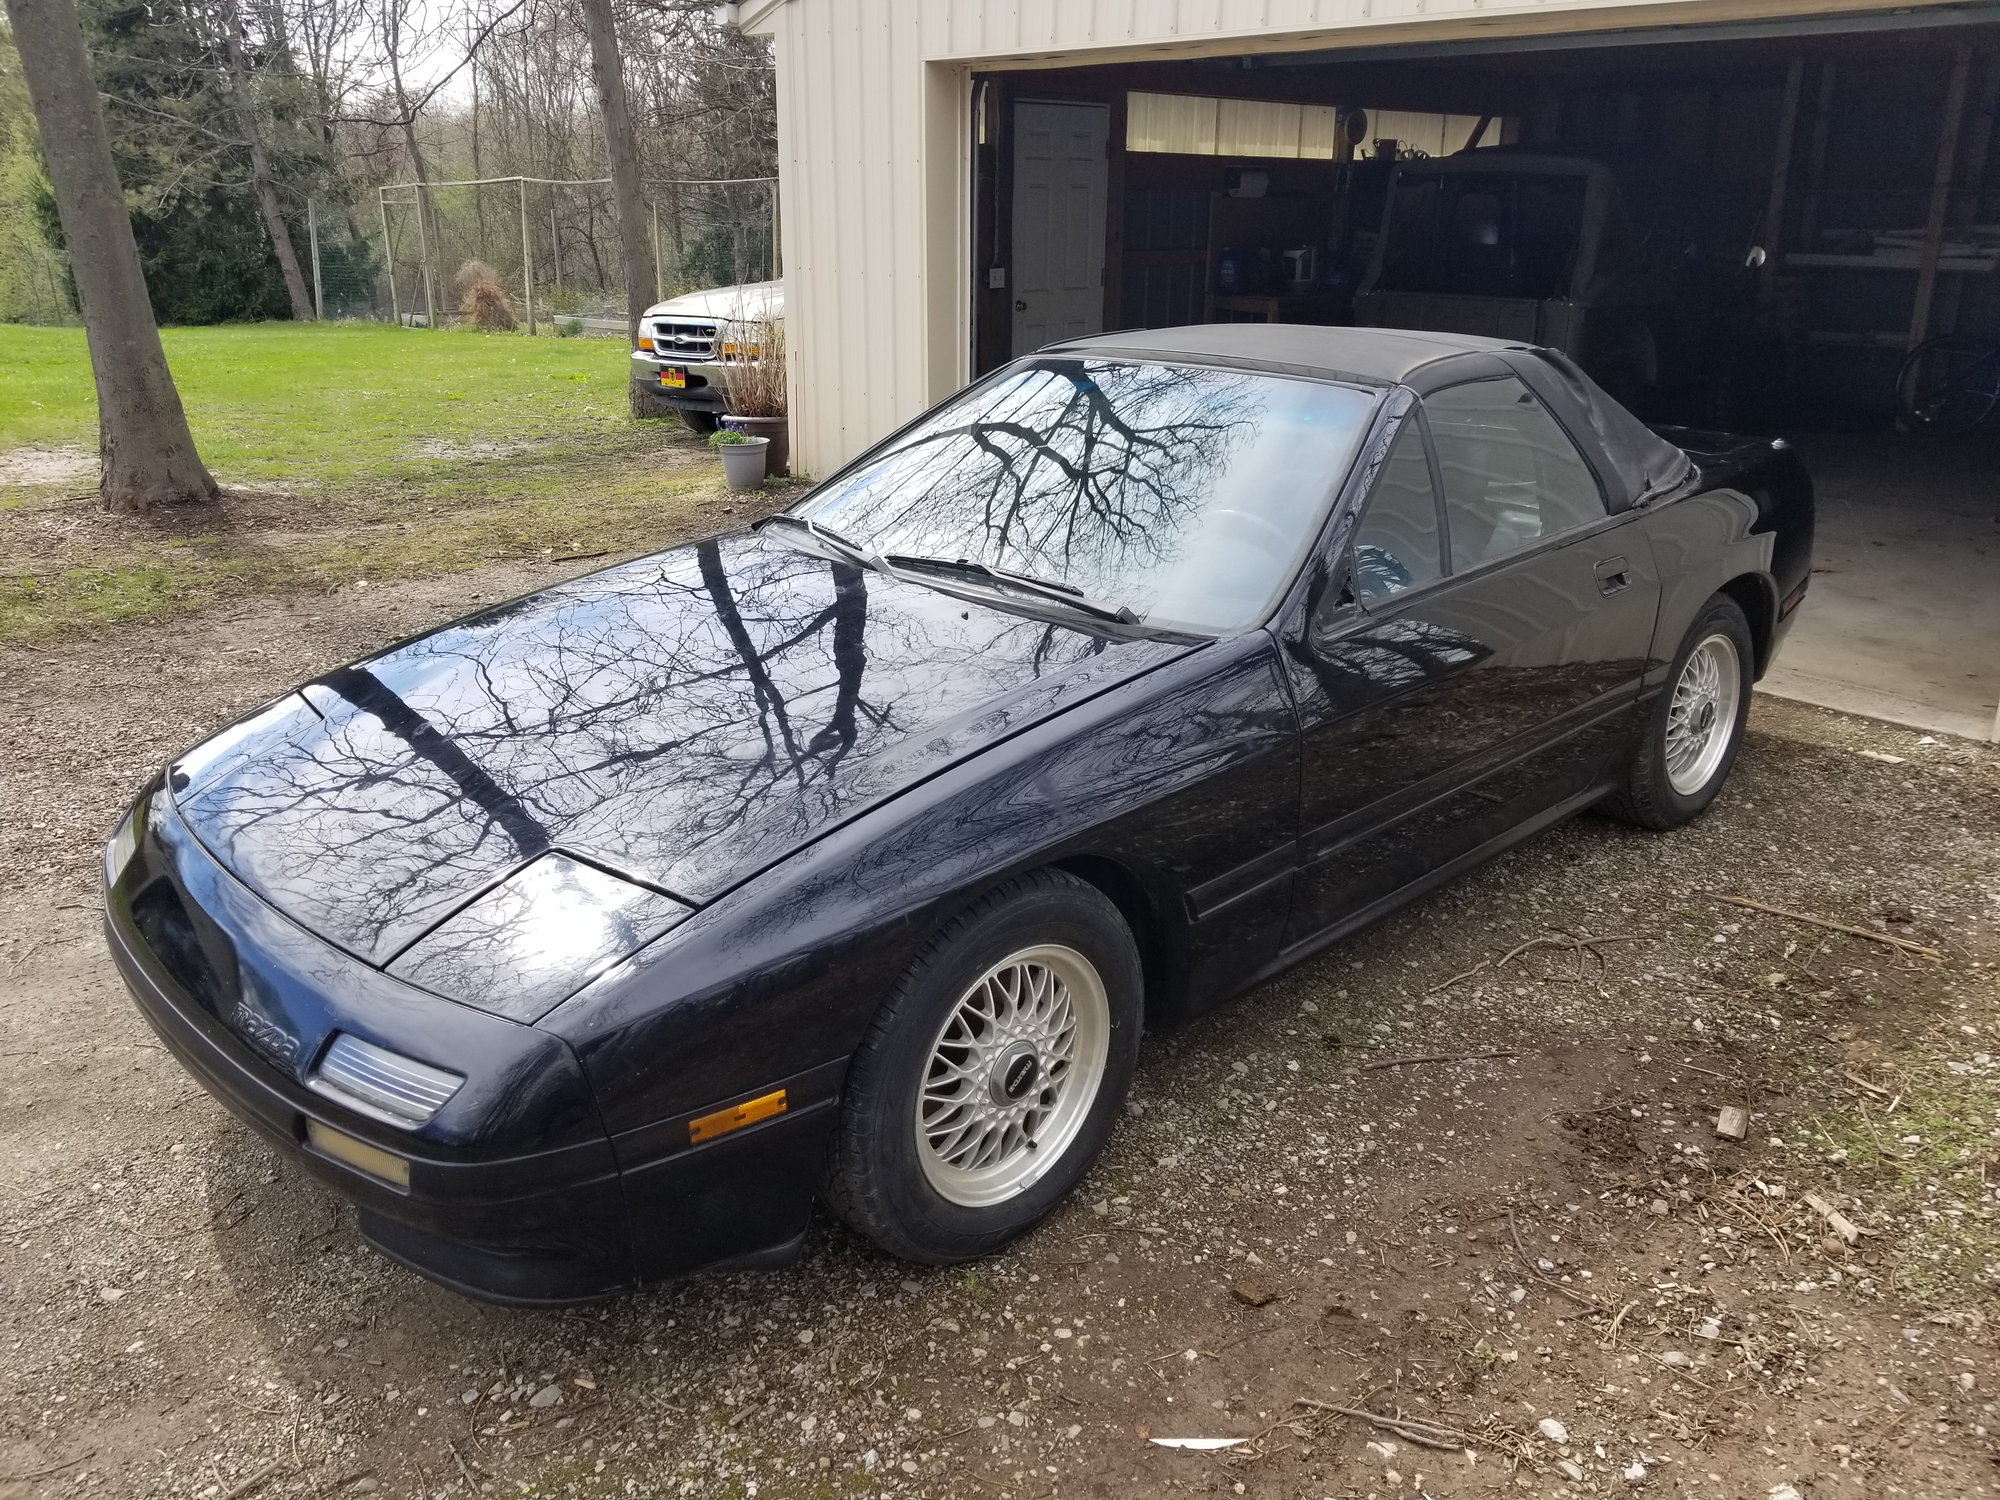 1990 Mazda RX-7 - 1990 Vert, all black - Used - VIN JM1FC352XL0713084 - 114,000 Miles - Other - 2WD - Automatic - Convertible - Black - Milford, MI 18381, United States